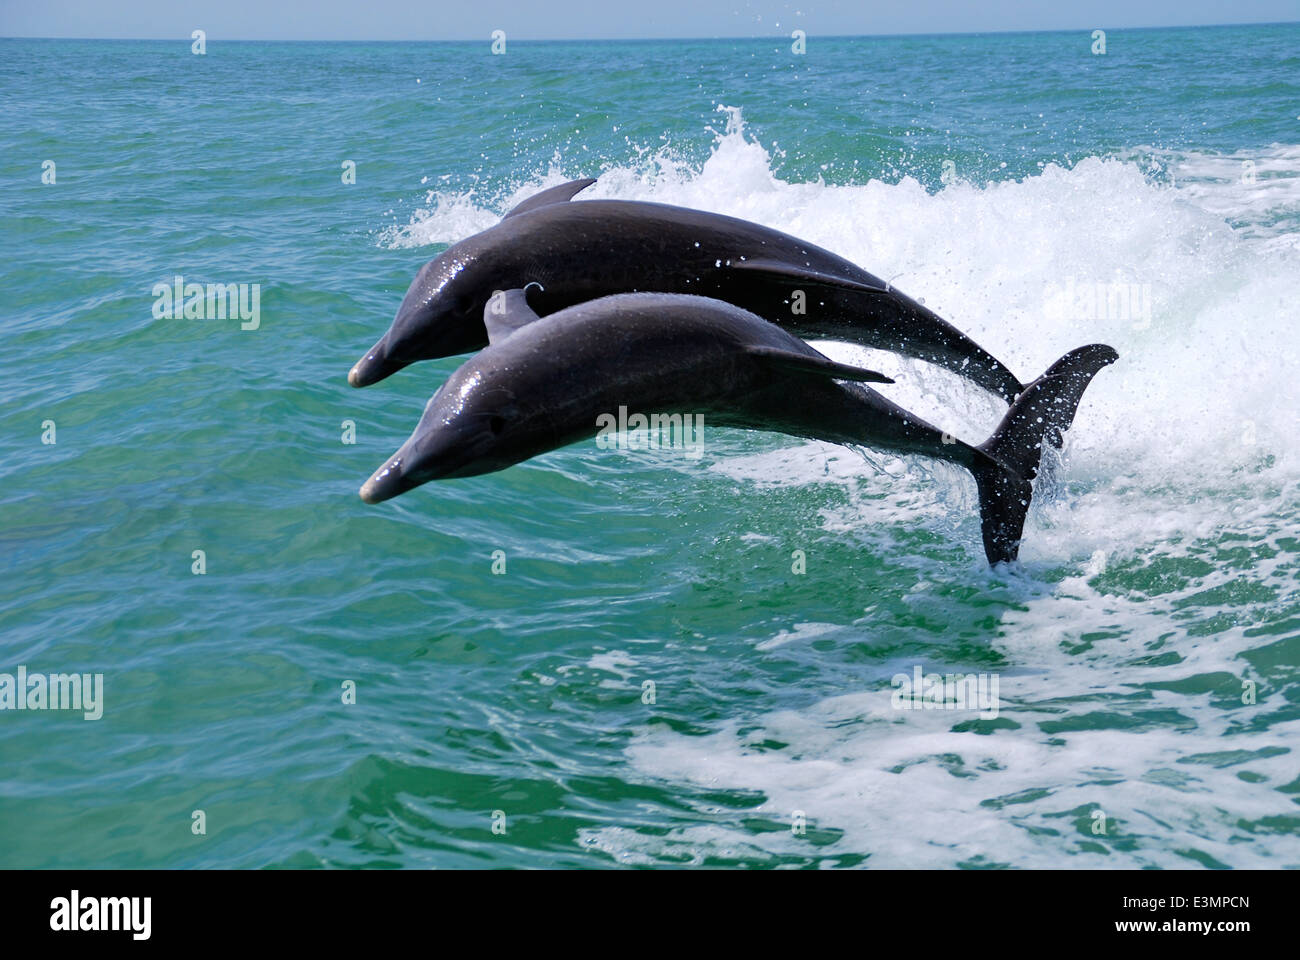 Two dolphins jumping in the Gulf of Mexico. Stock Photo